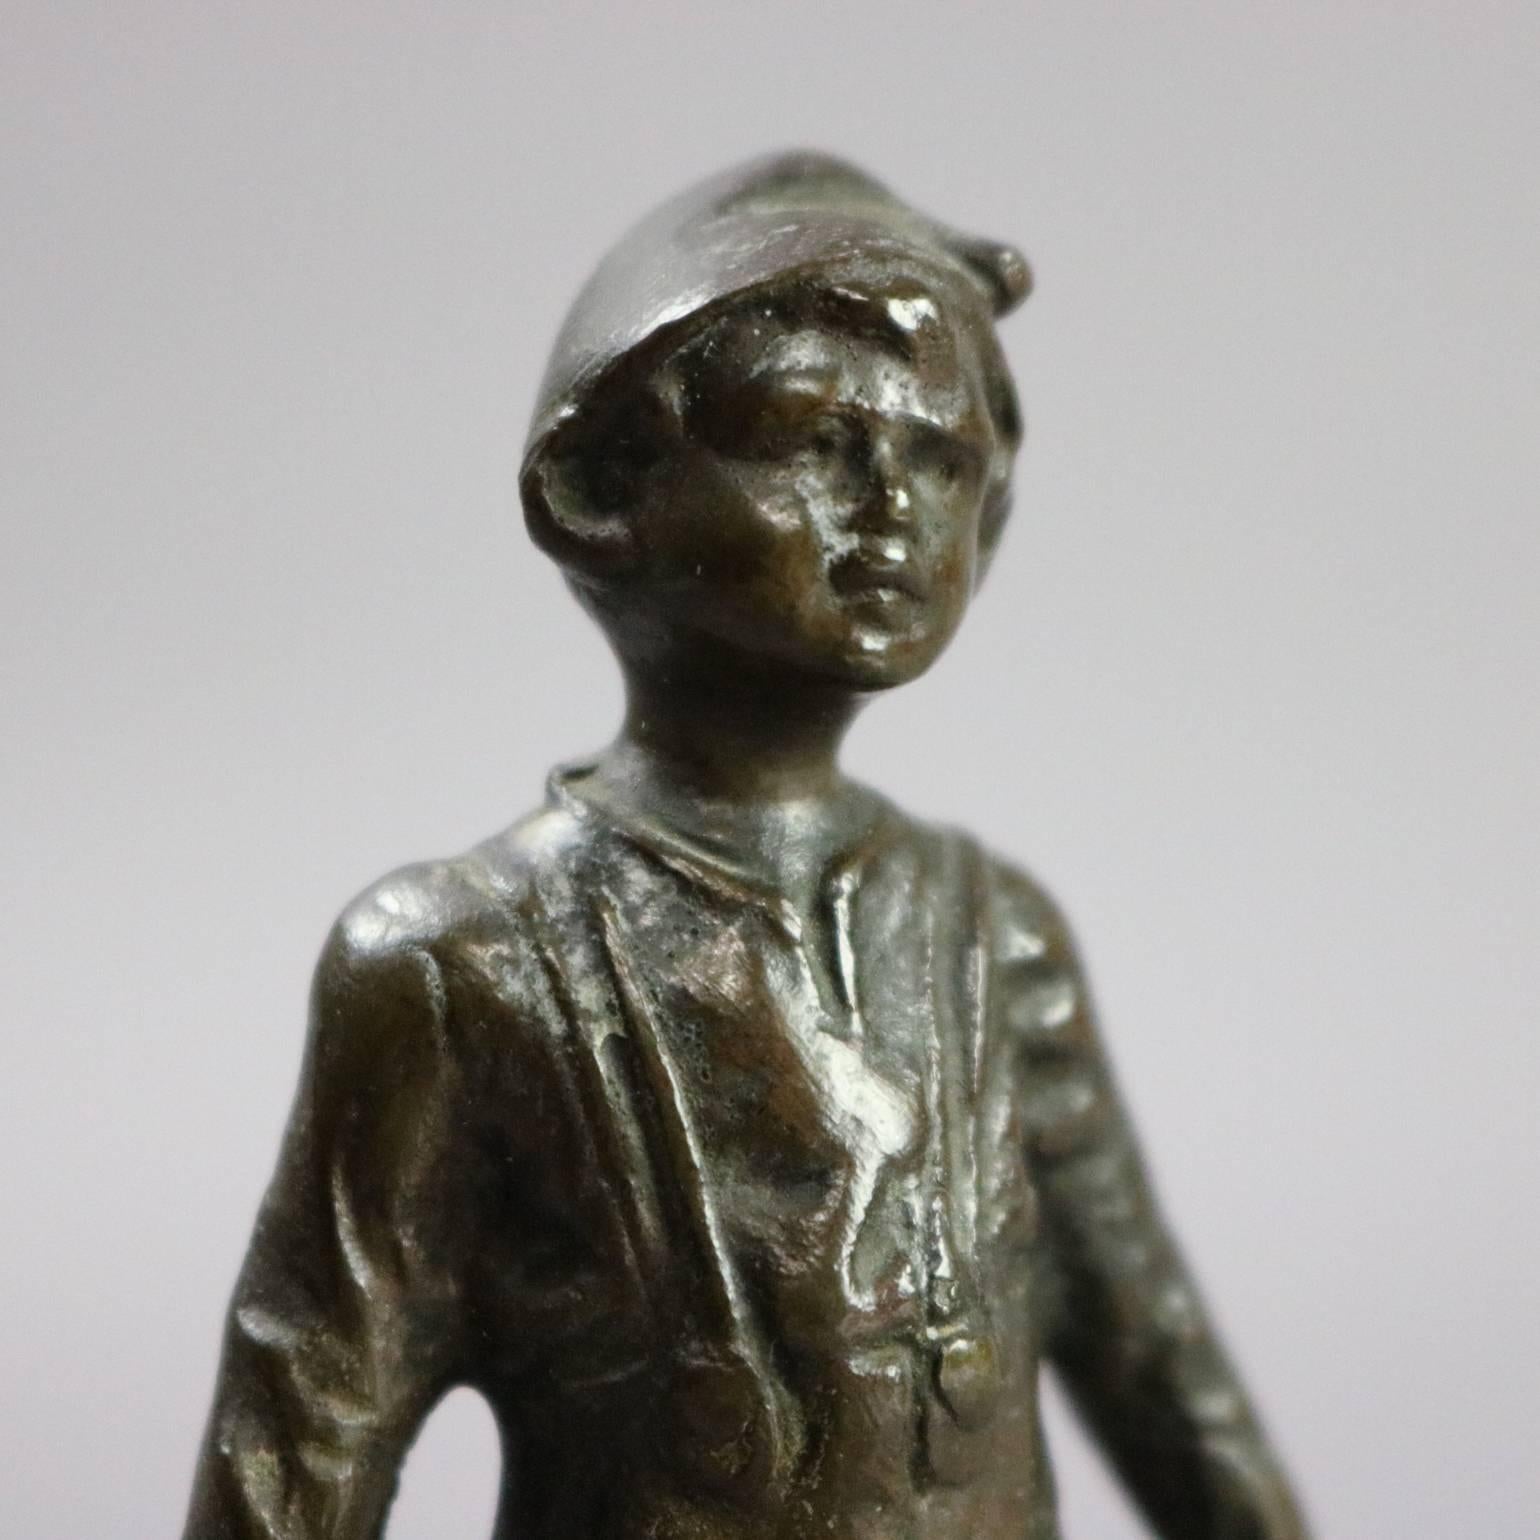 19th Century Antique Figural Cast Bronze Sculpture of Young Boy with Shoe on Marble Base